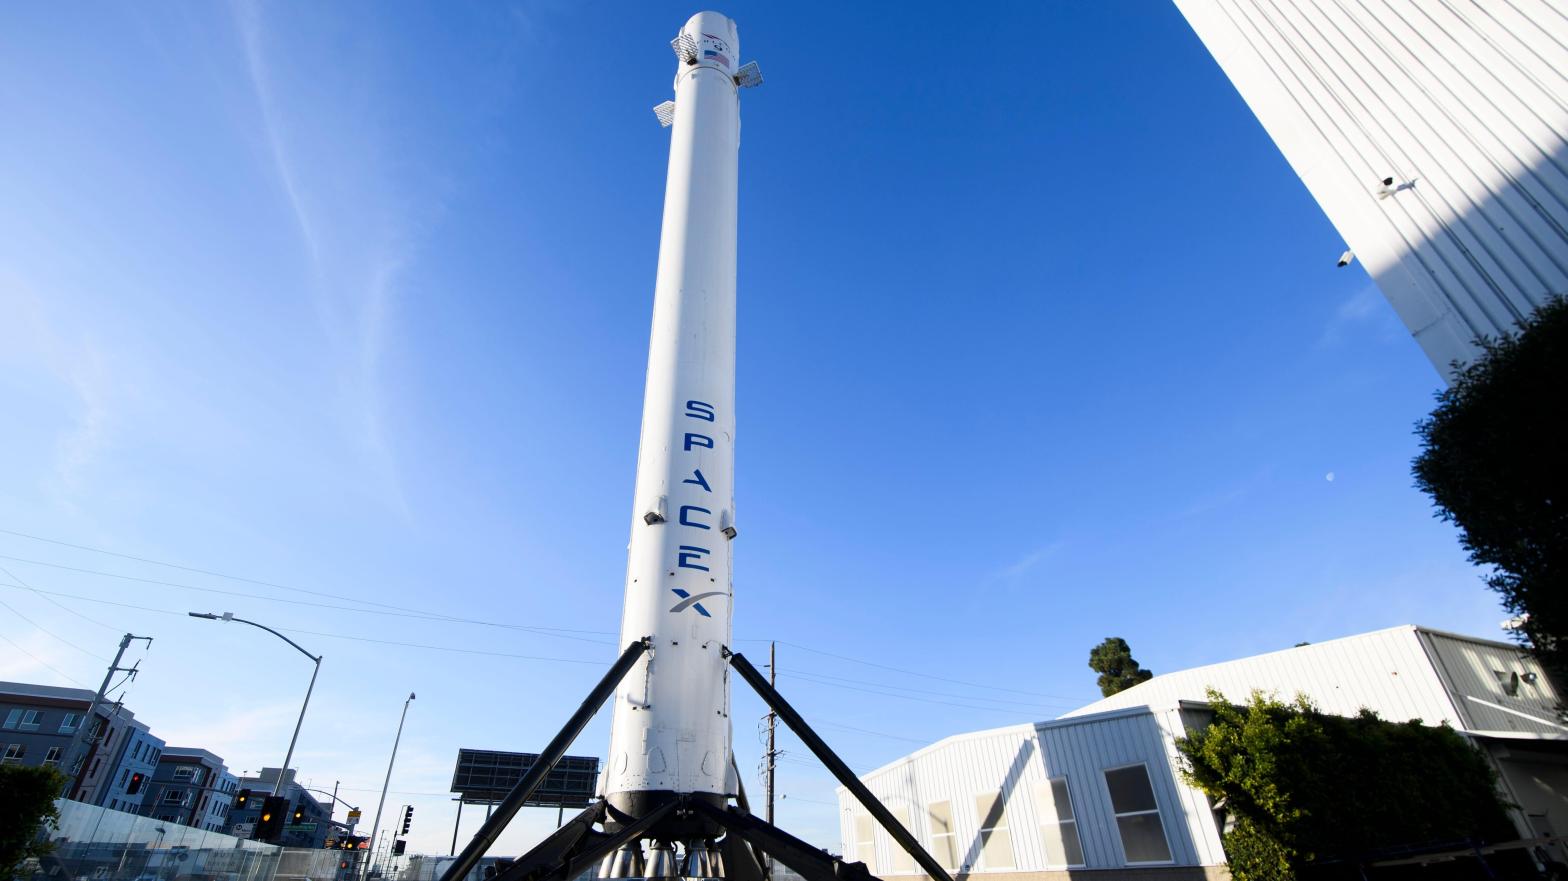 The recovered first stage of a Falcon 9 rocket was put on display around SpaceX's offices in Hawthorne, California last year. The rocket used a model of the Raptor engine.  (Photo: PATRICK T. FALLON/AFP, Getty Images)